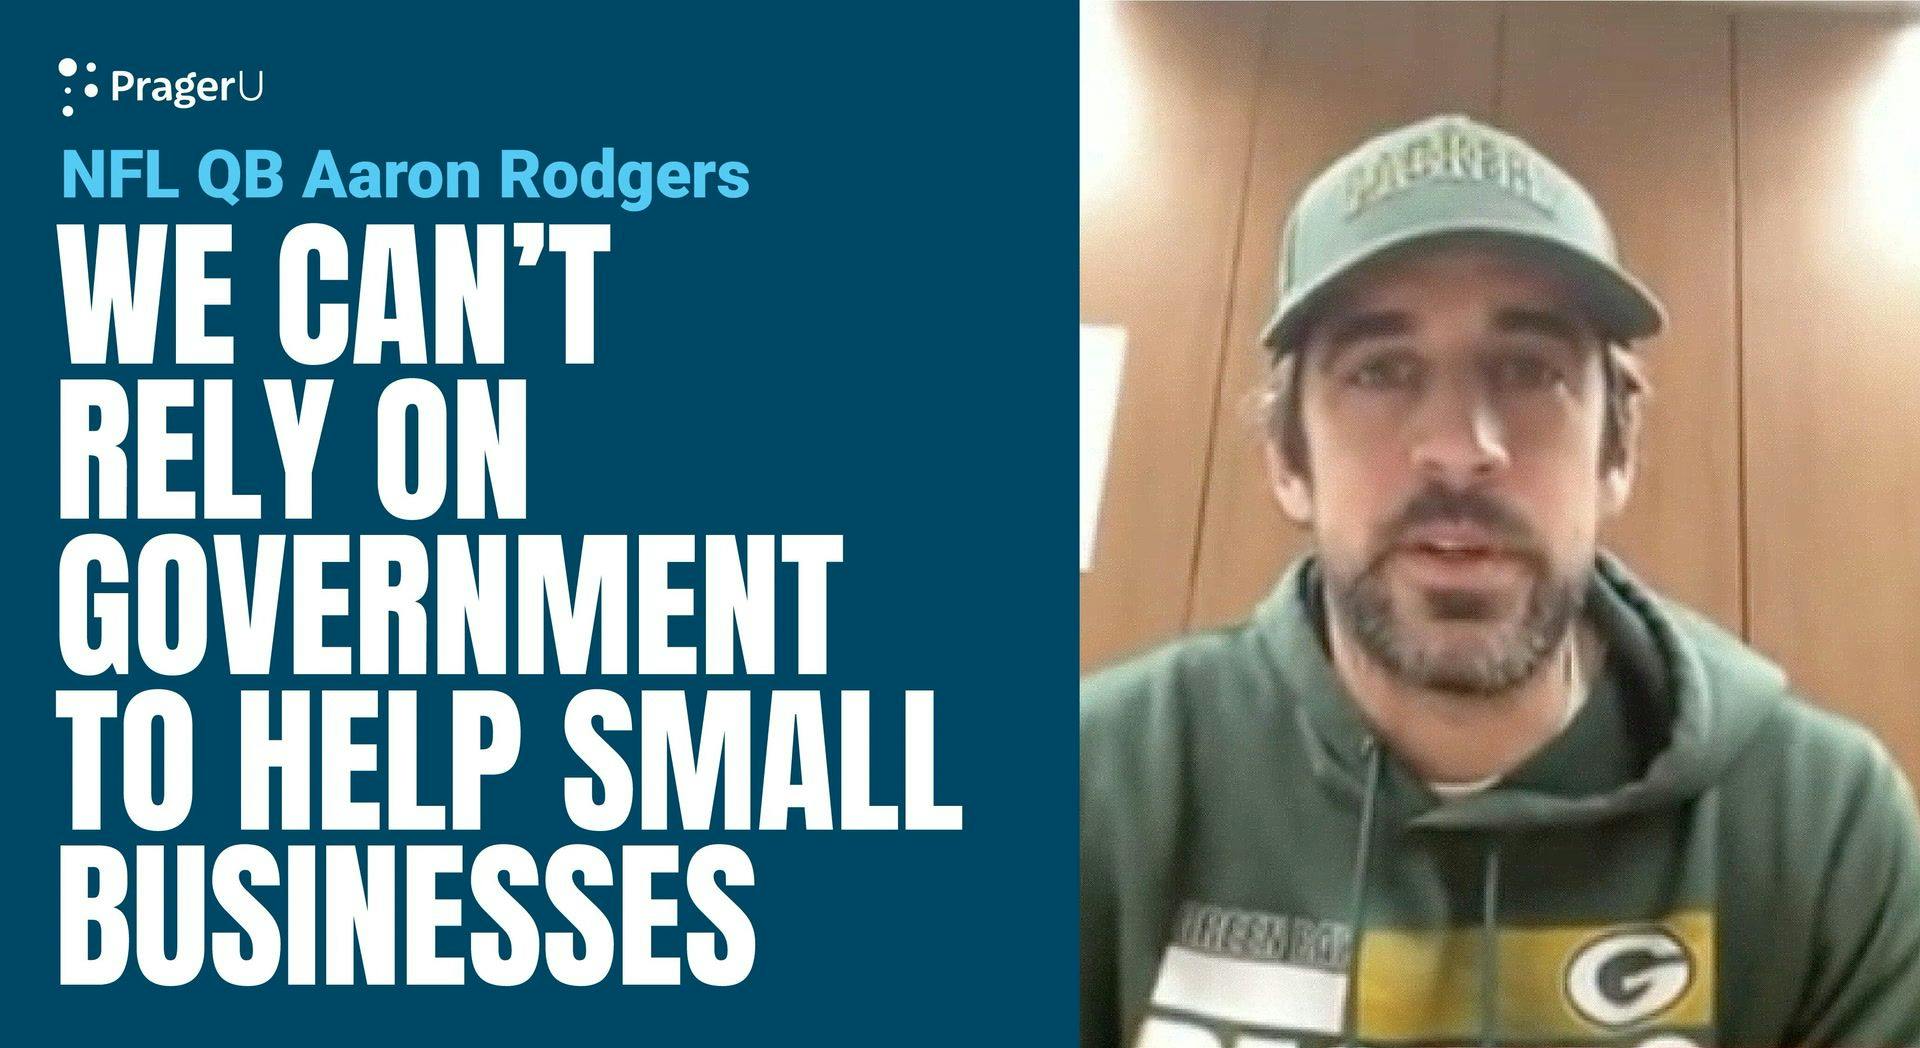 NFL QB Aaron Rodgers: We can't rely on government to help small businesses